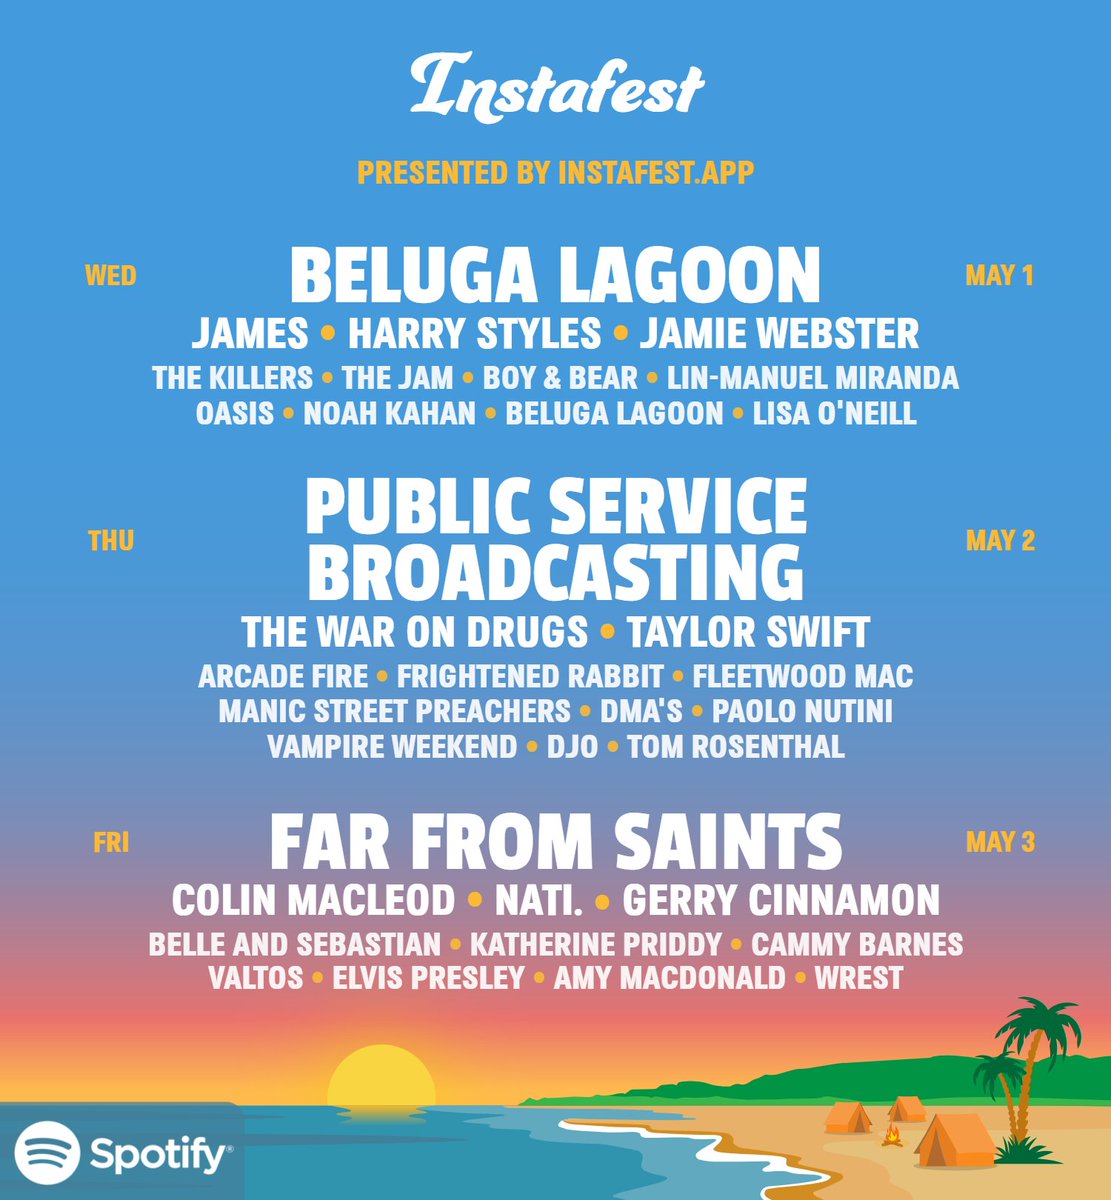 The YHRF Festival headliner has been set in stone this last couple of years. We're keeping @BelugaLagoon busy on the opening day ken! 🐳 How does yir own festival look? Show us yours in the replies! 🤟 instafest.app